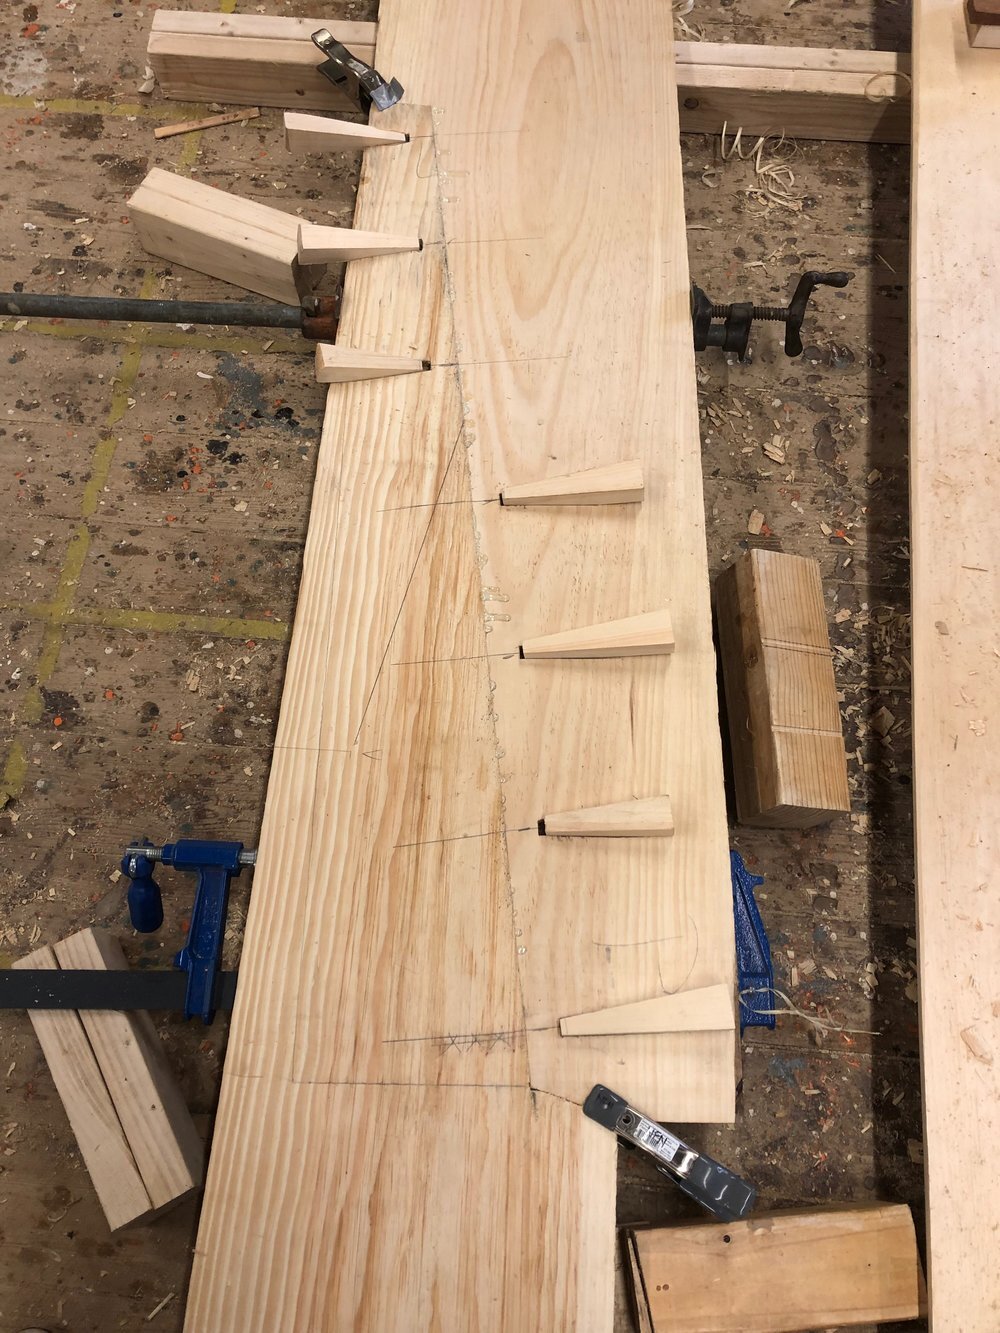  You can see the scarf joint cut in one of the side planks to join two pieces together. The side planks are edge nailed in the same way the bottom planks are. 